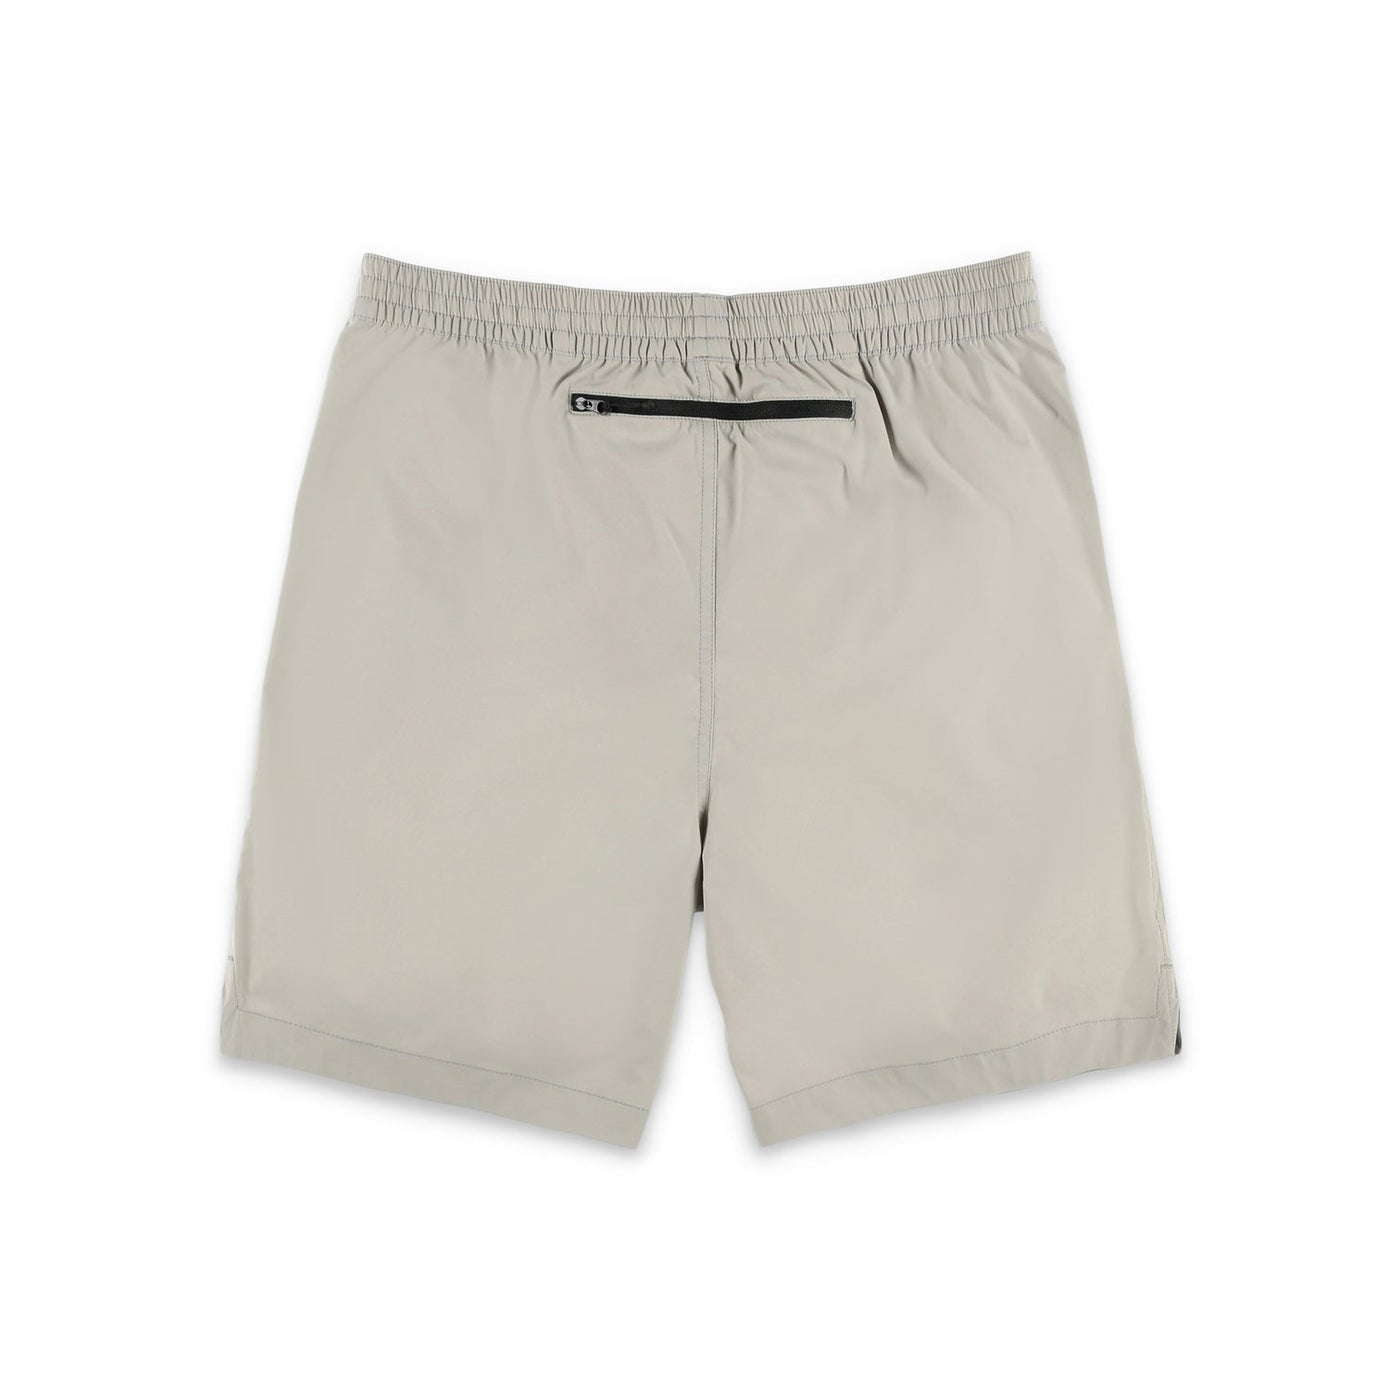 Men's Tech Shorts Lightweight - The Lake and Company